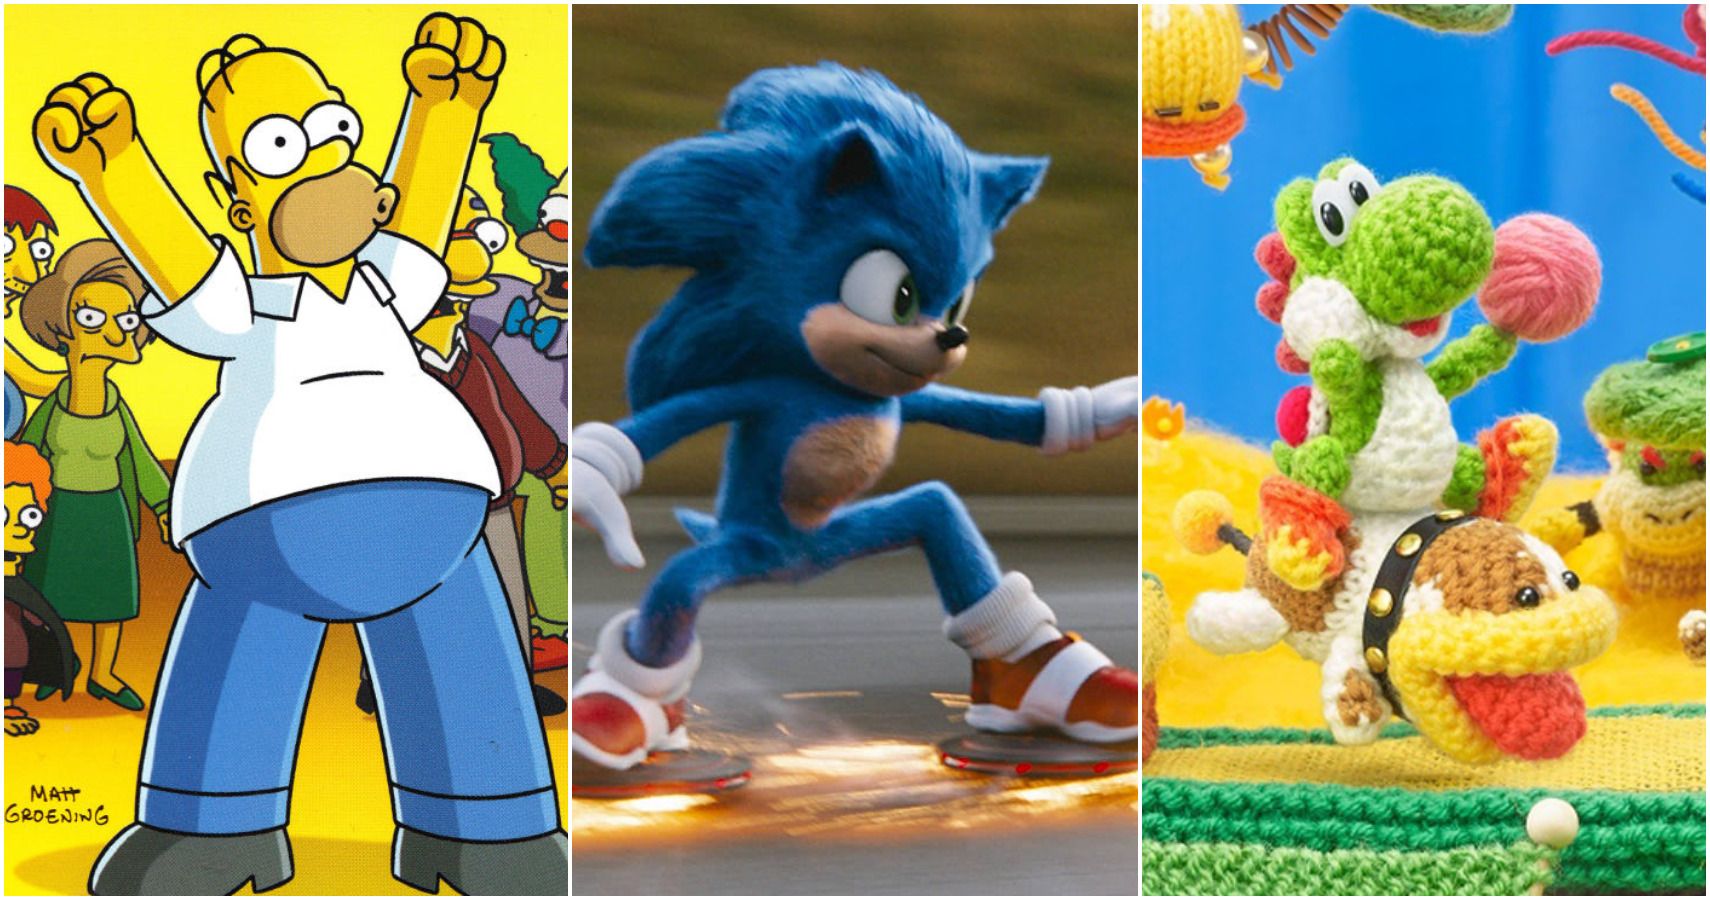 10. Sonic the Hedgehog: Pronouns and Diversity in Gaming - wide 7